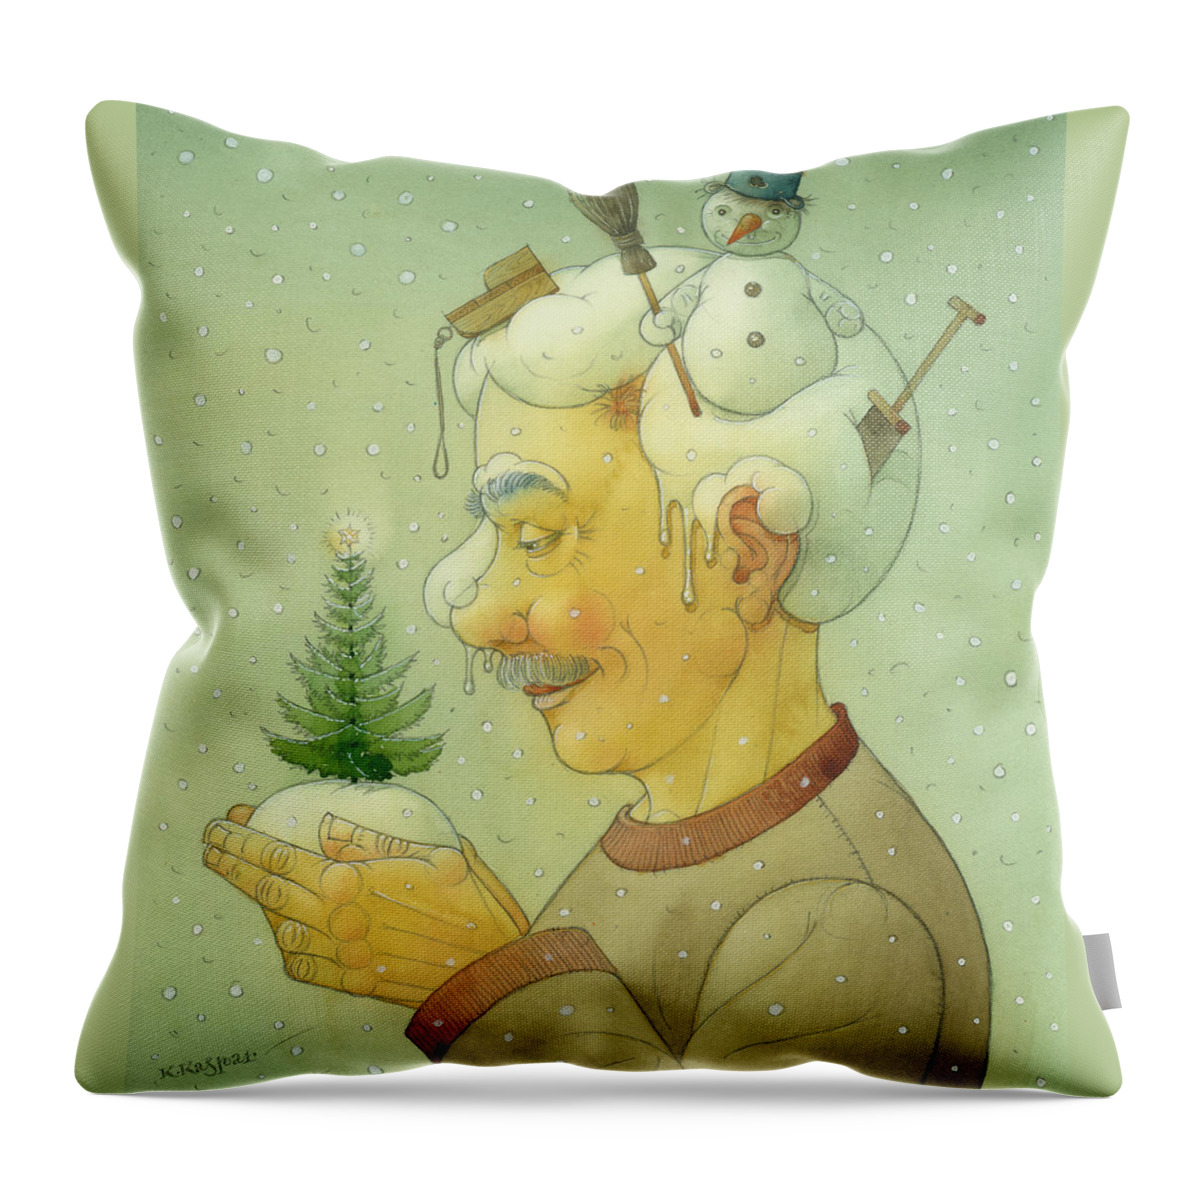 Winter Throw Pillow featuring the painting Snovy Winter by Kestutis Kasparavicius